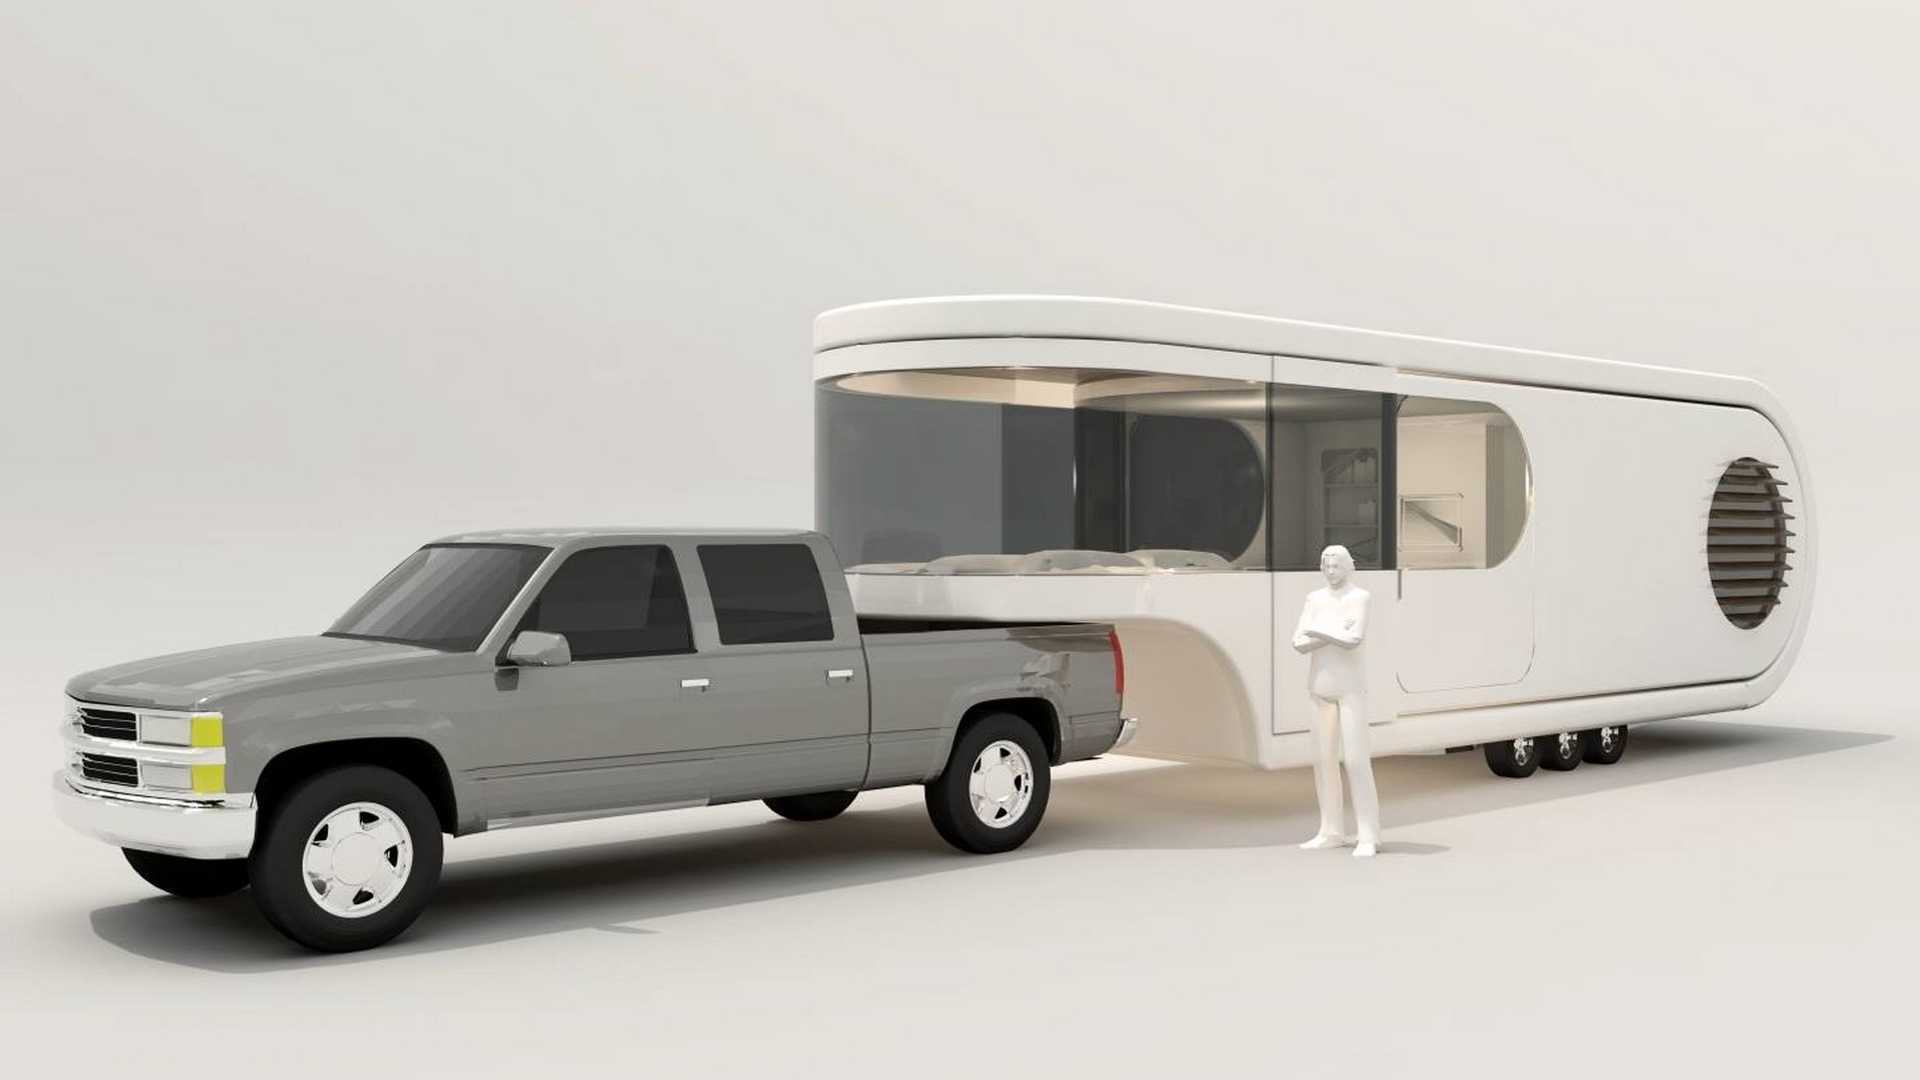 https://s1.cdn.autoevolution.com/images/news/gallery/romotow-trailer-camper-has-in-built-patio-for-the-ultimate-chill-experience_5.jpg